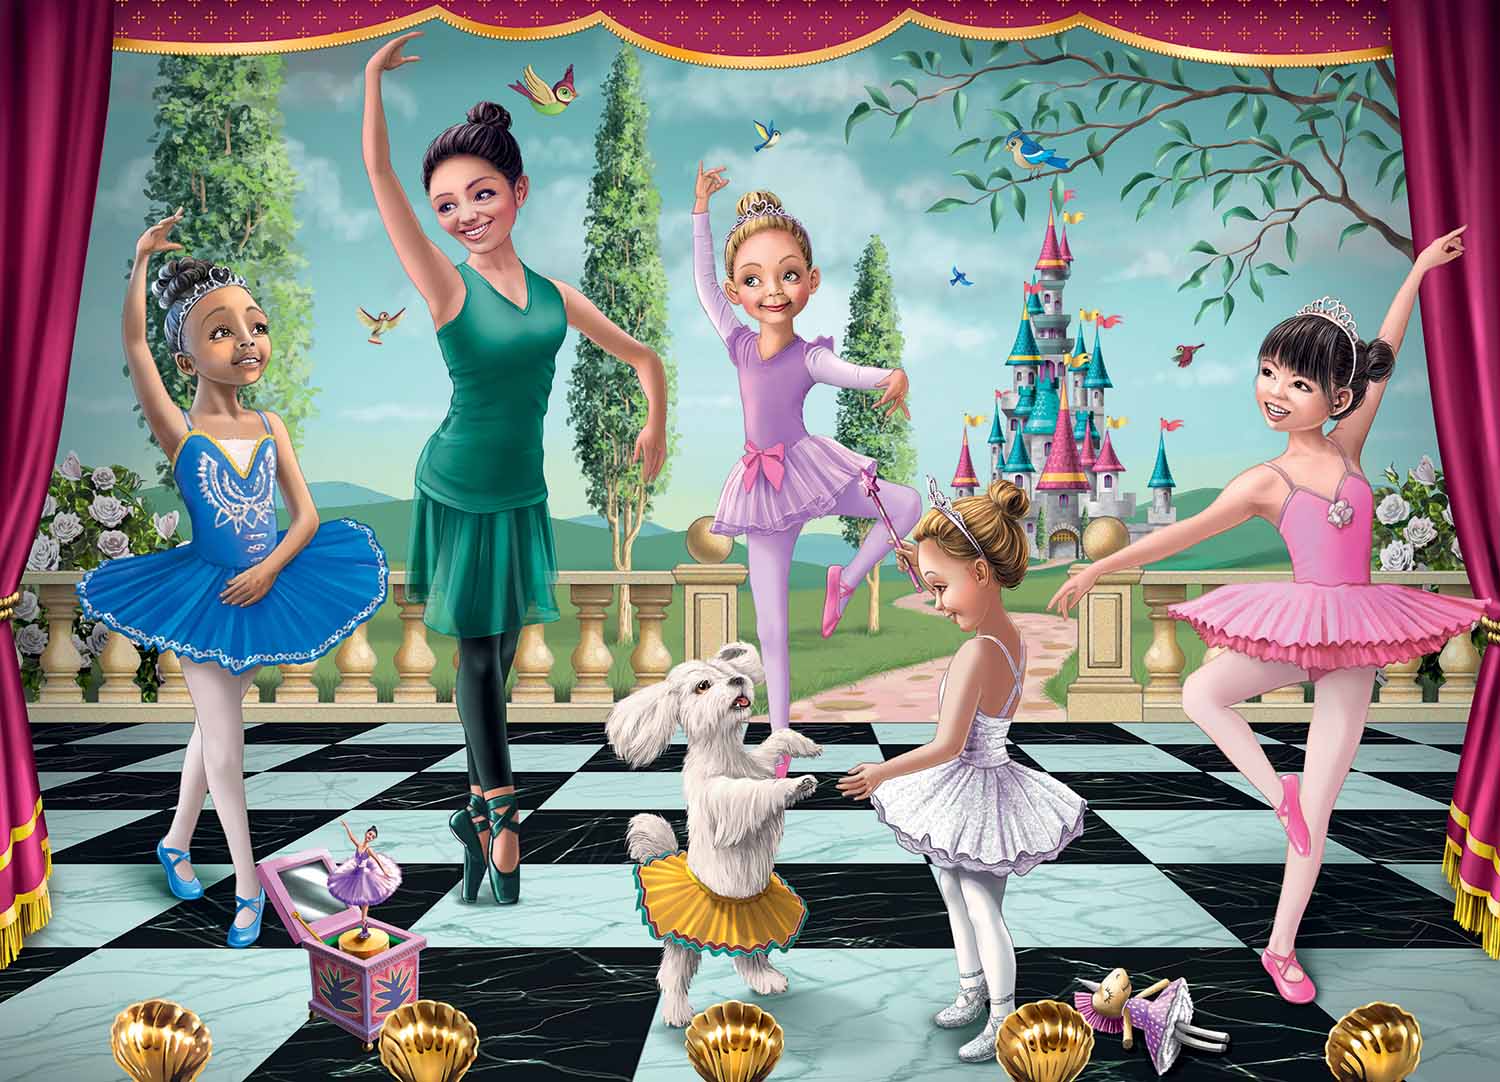 Ballet Rehearsal People Children's Puzzles